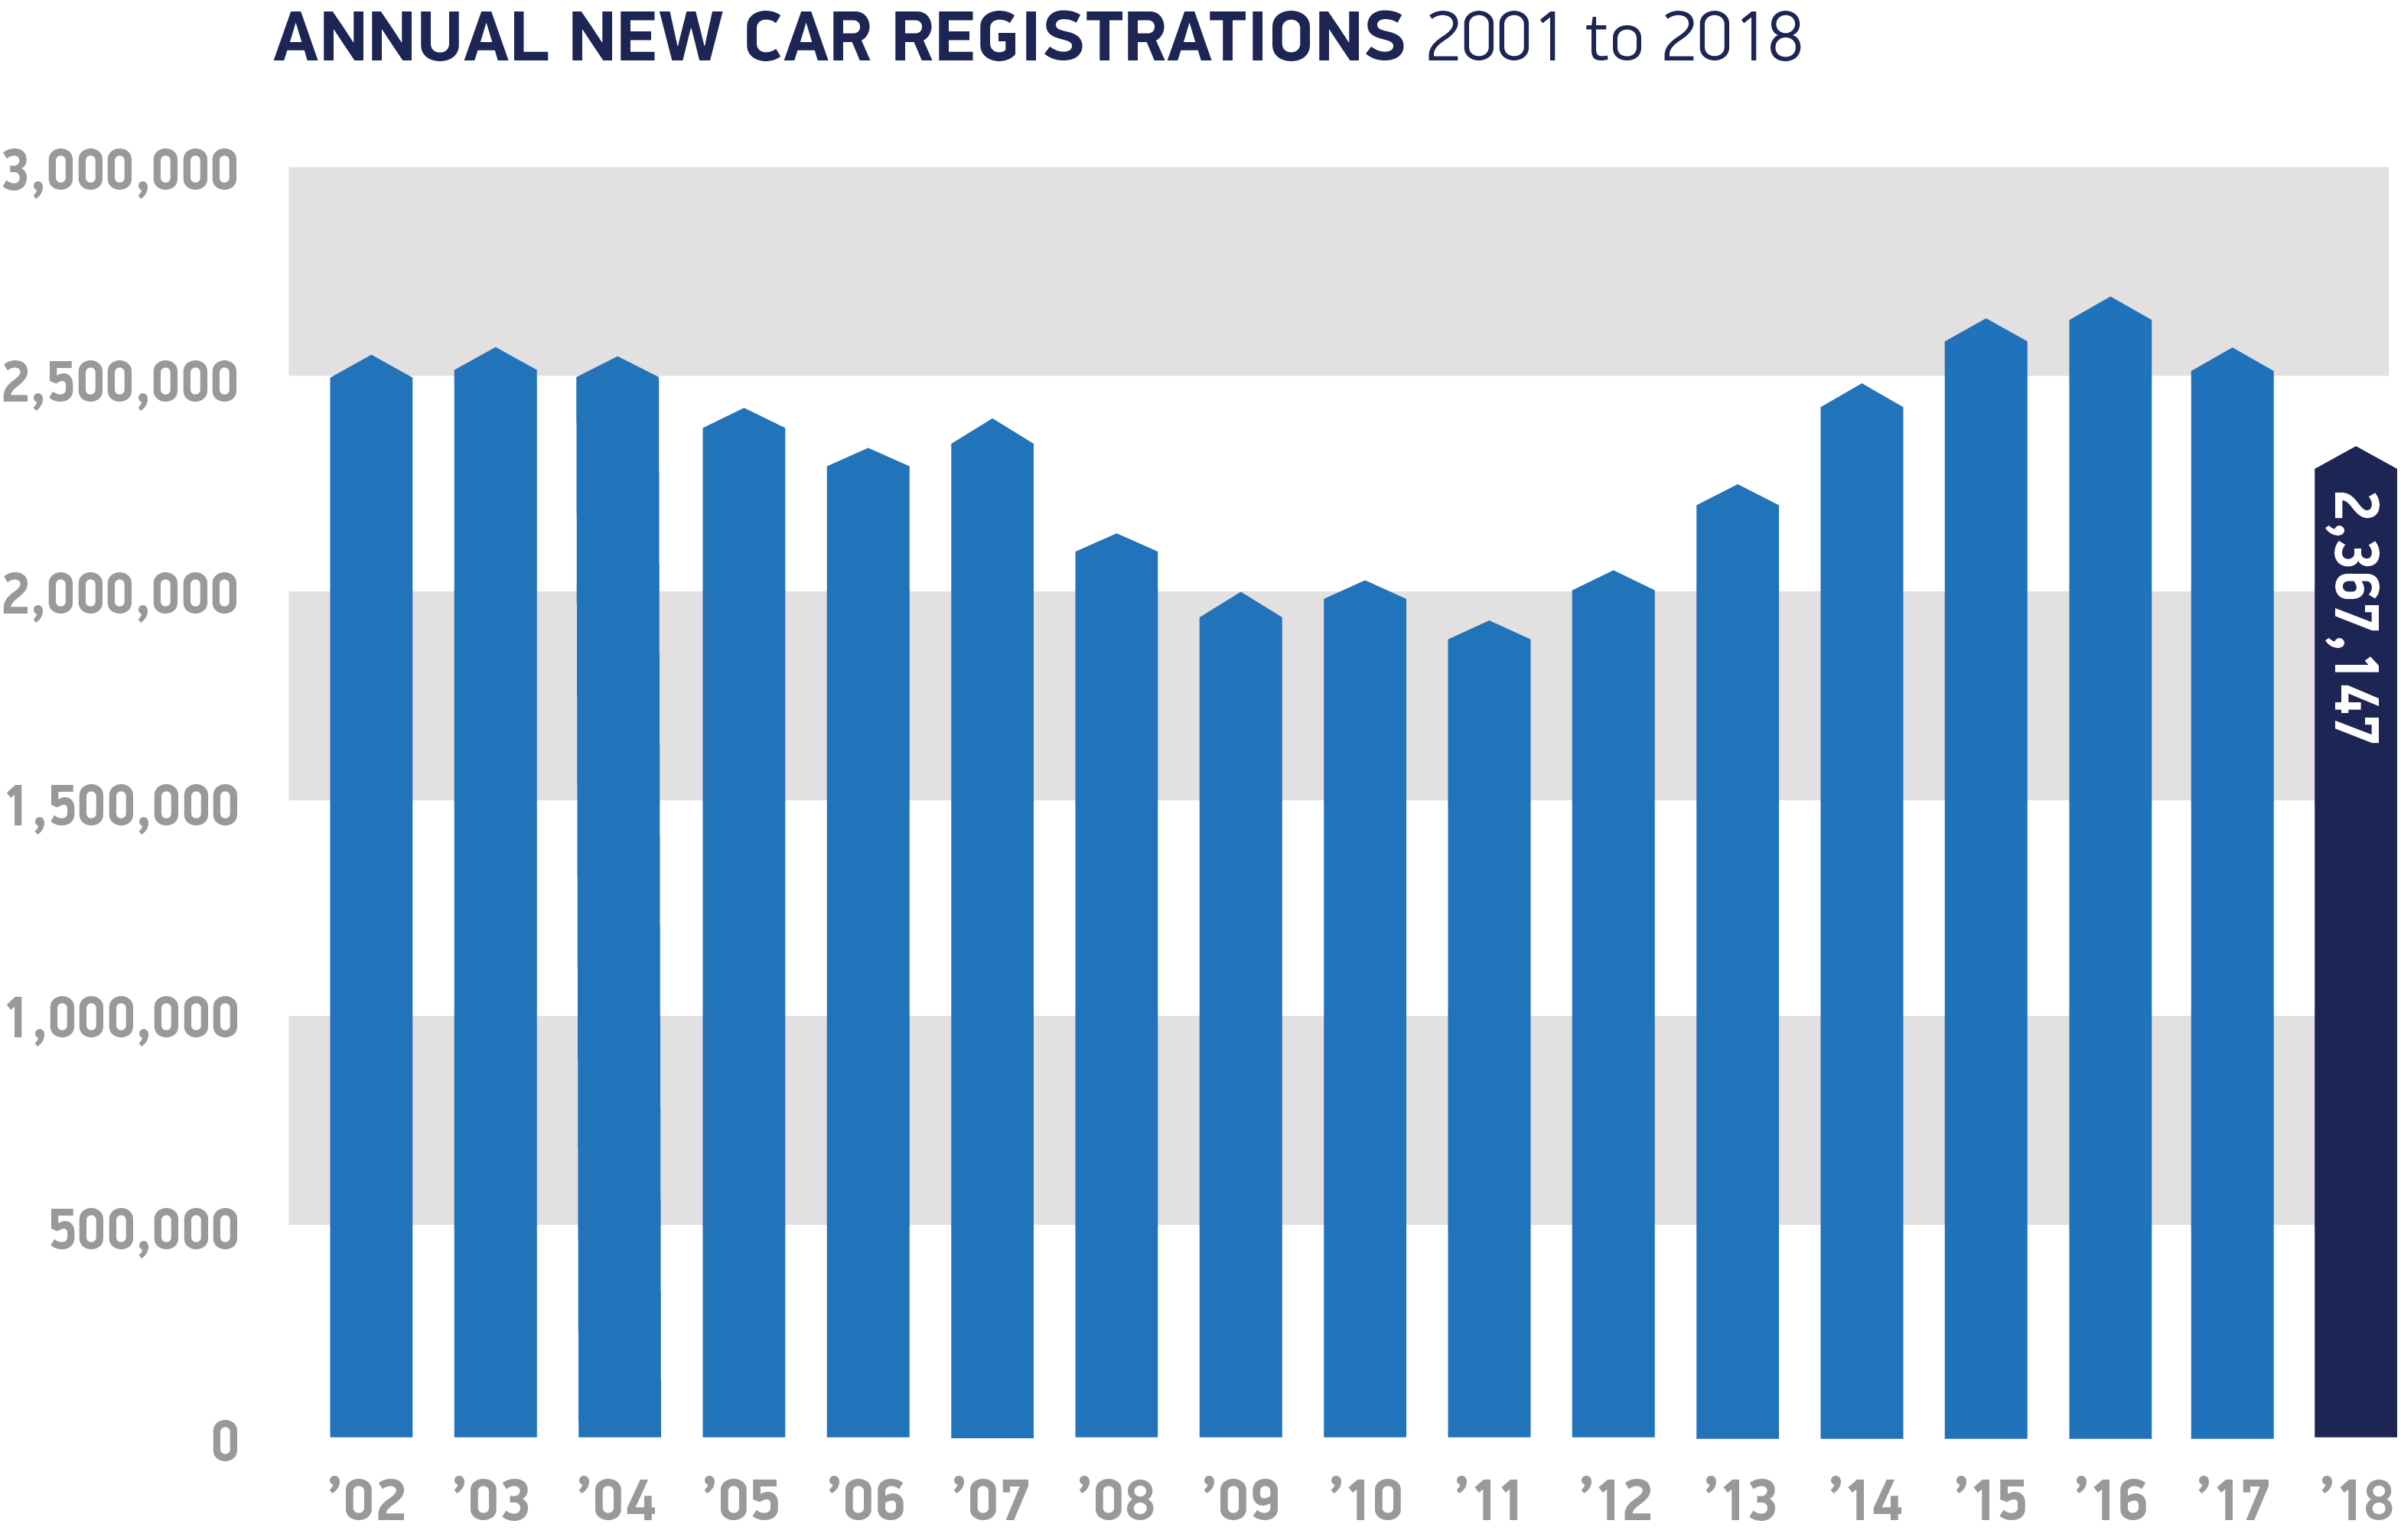 UK new car registrations fell 6.8% in 2018 to 2.37m units, the Society of Motor Manufacturers & Traders (SMMT) has reported.